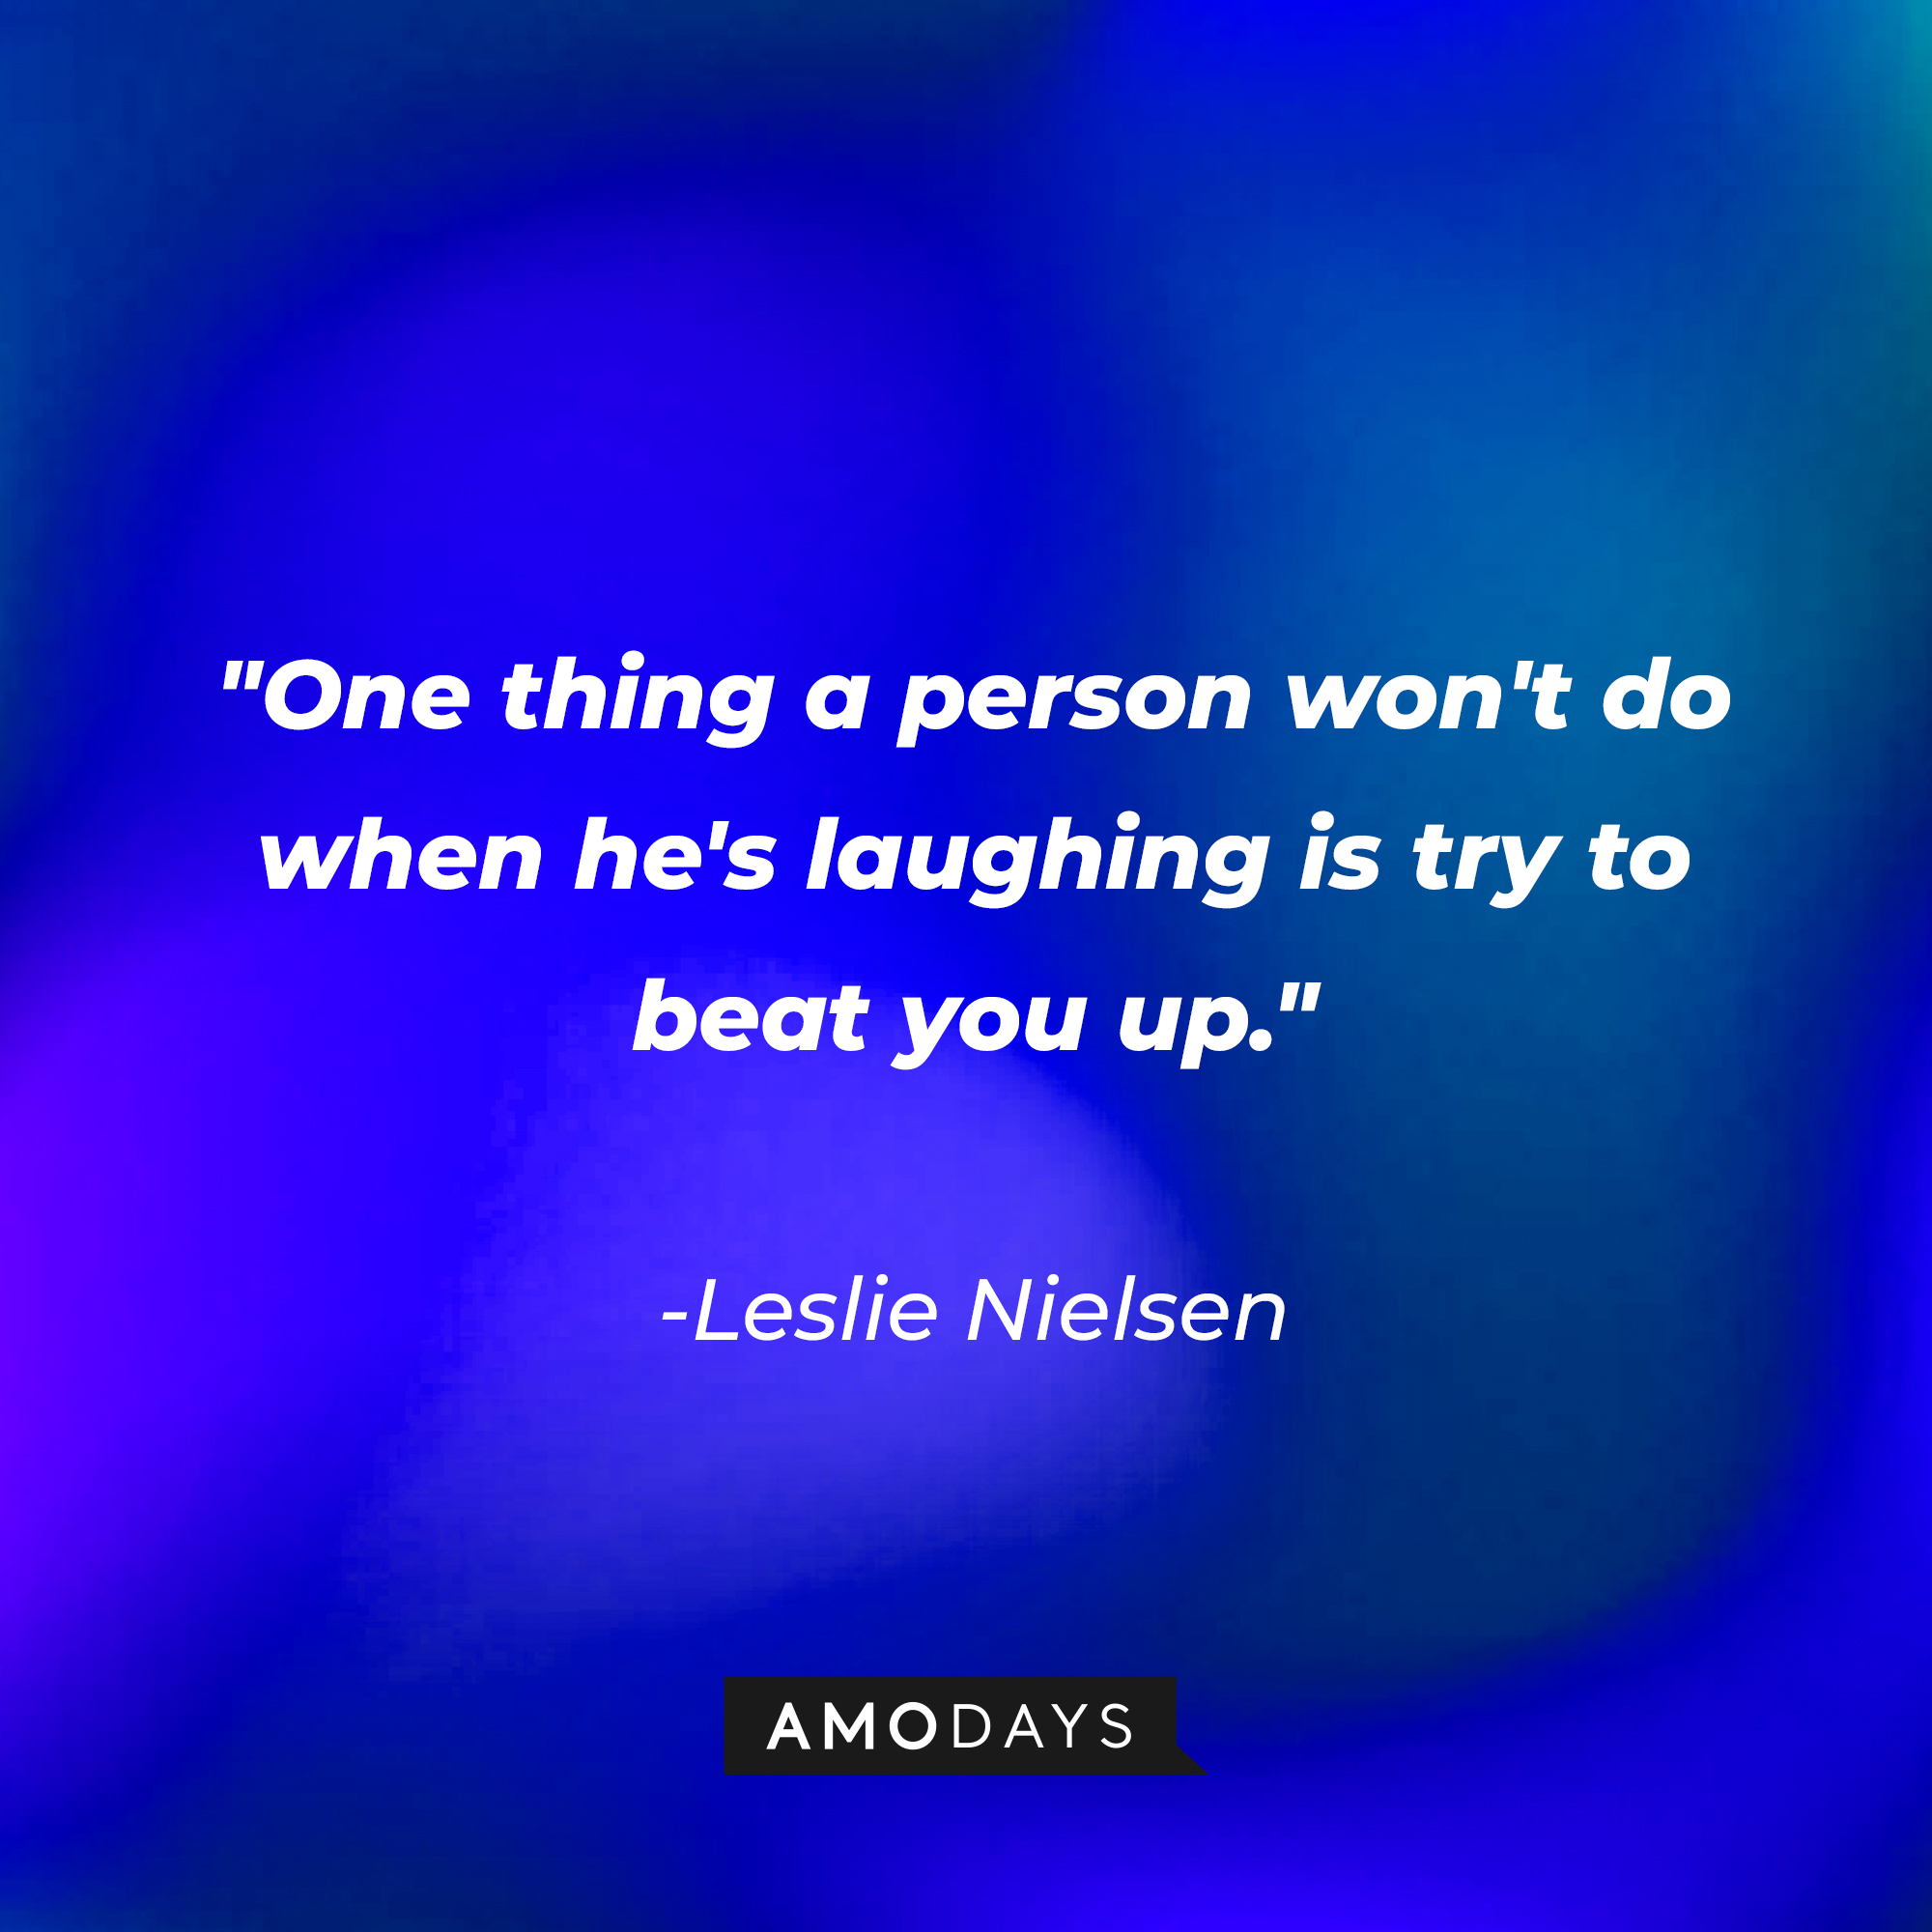 Leslie Nielsen's quote: "One thing a person won't do when he's laughing is try to beat you up." | Source: Amodays